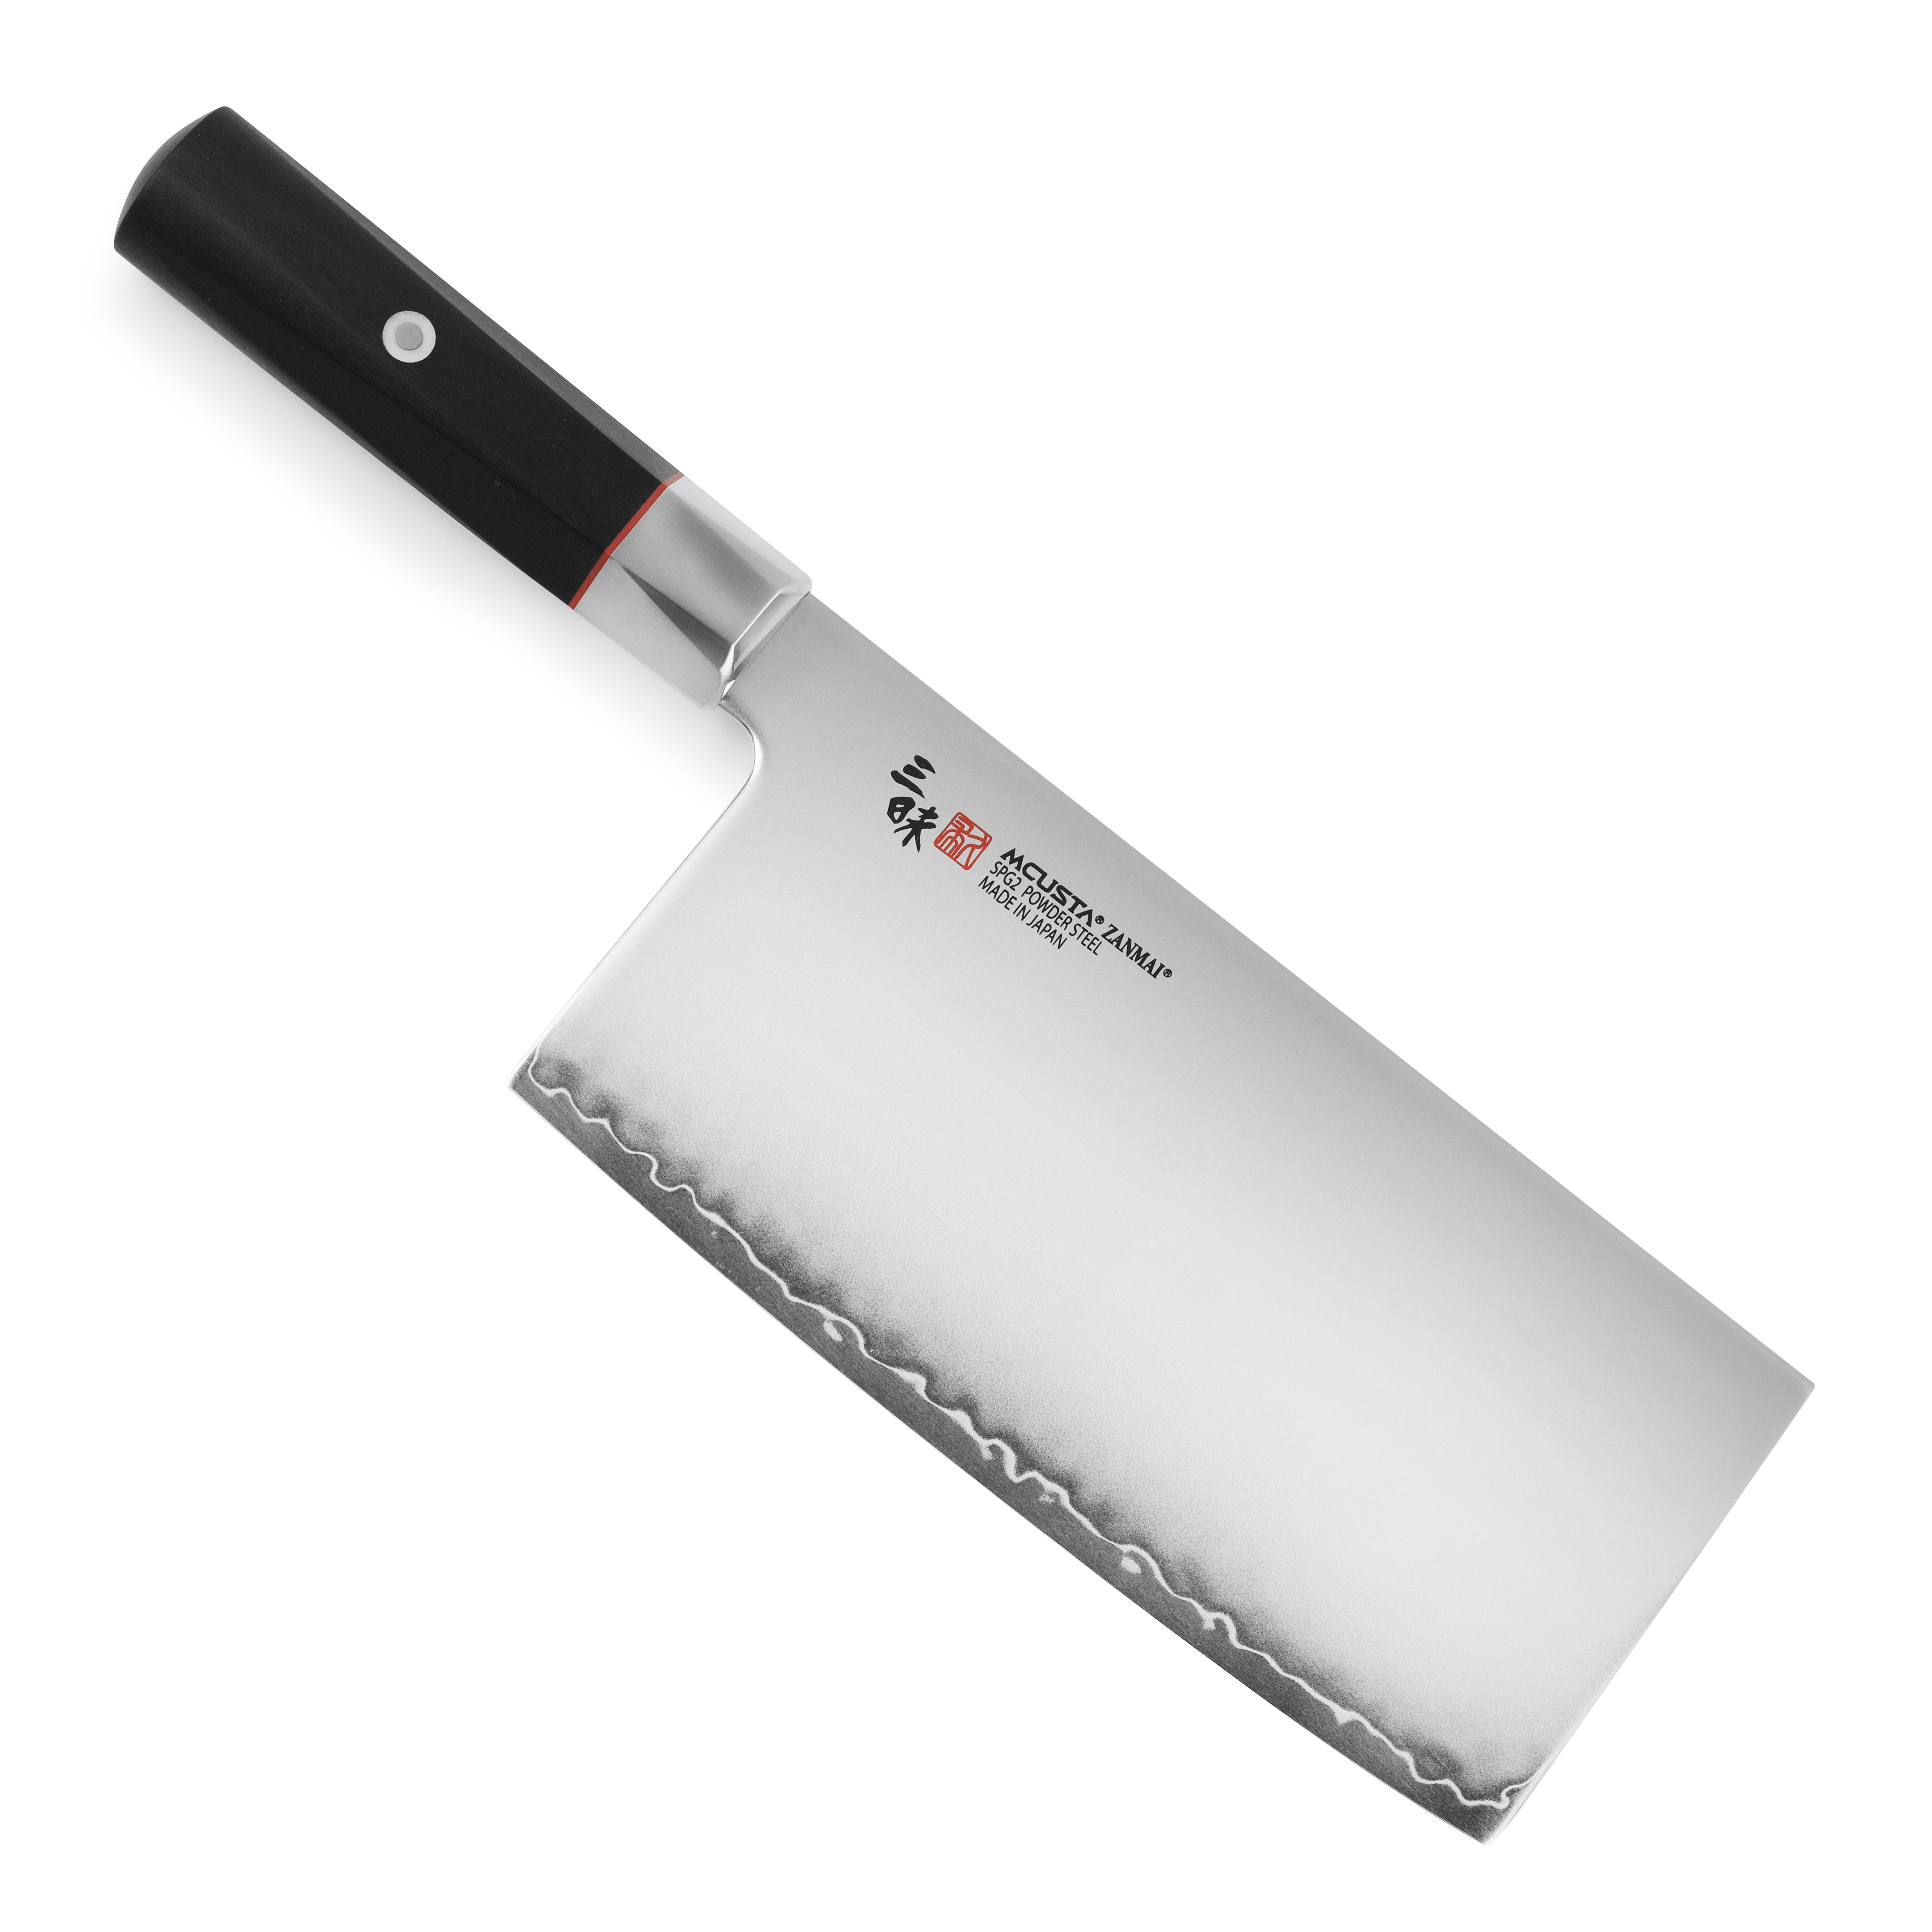 Zanmai SG2 Chinese Chef's Knife - 7 Vegetable Cleaver